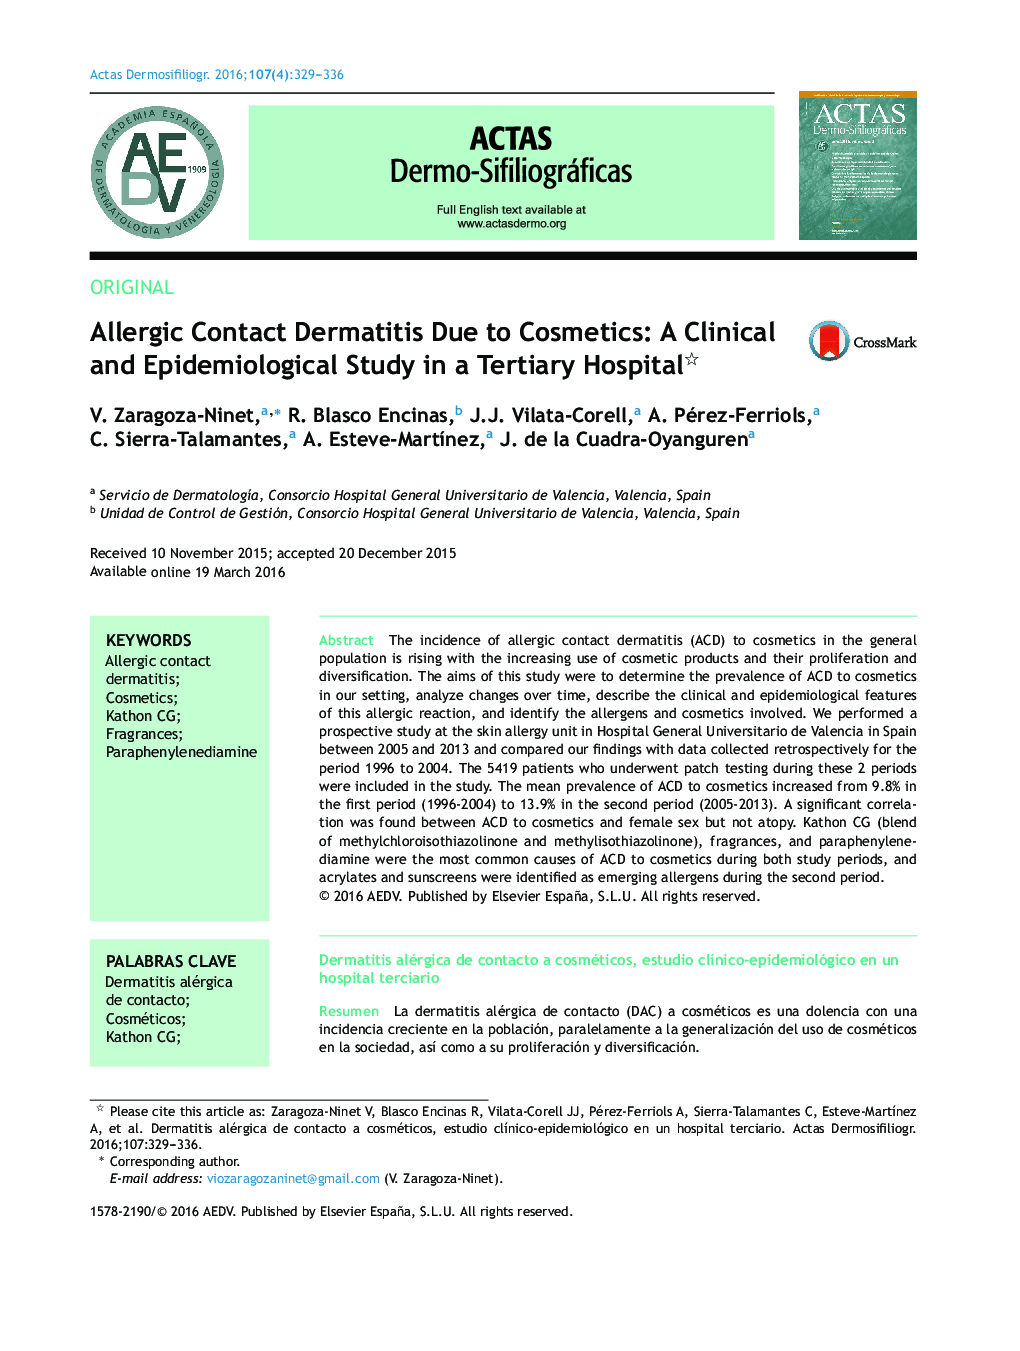 Allergic Contact Dermatitis Due to Cosmetics: A Clinical and Epidemiological Study in a Tertiary Hospital 